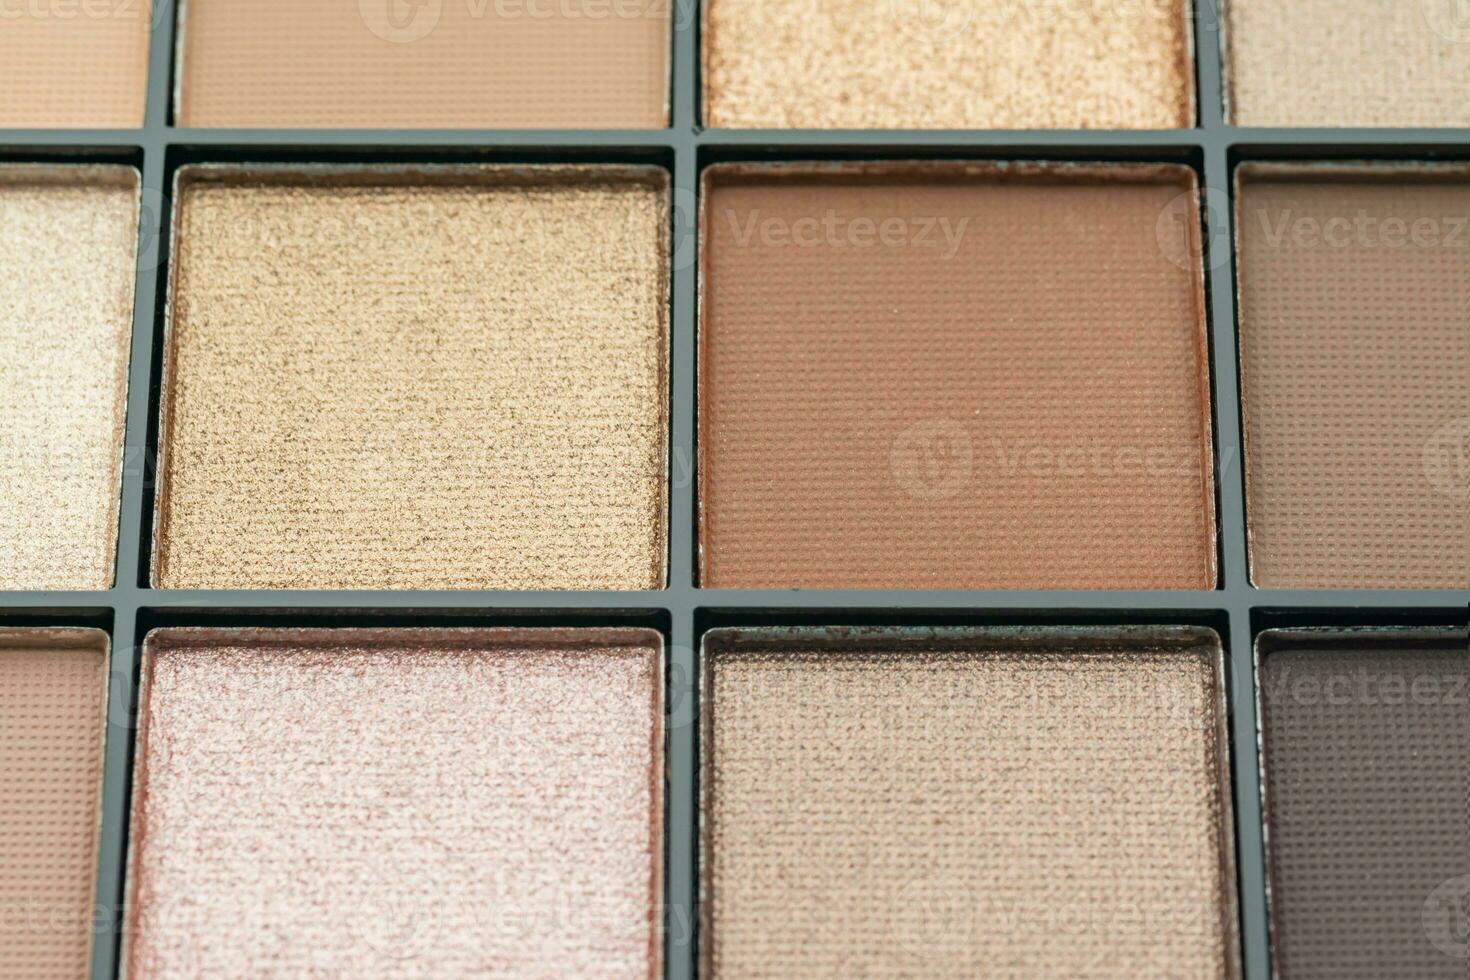 Eyeshadow palette, eye shadows cosmetics product as luxury beauty brand promotion. Fashion blog design. Contouring palette. Makeup palette, close up photo